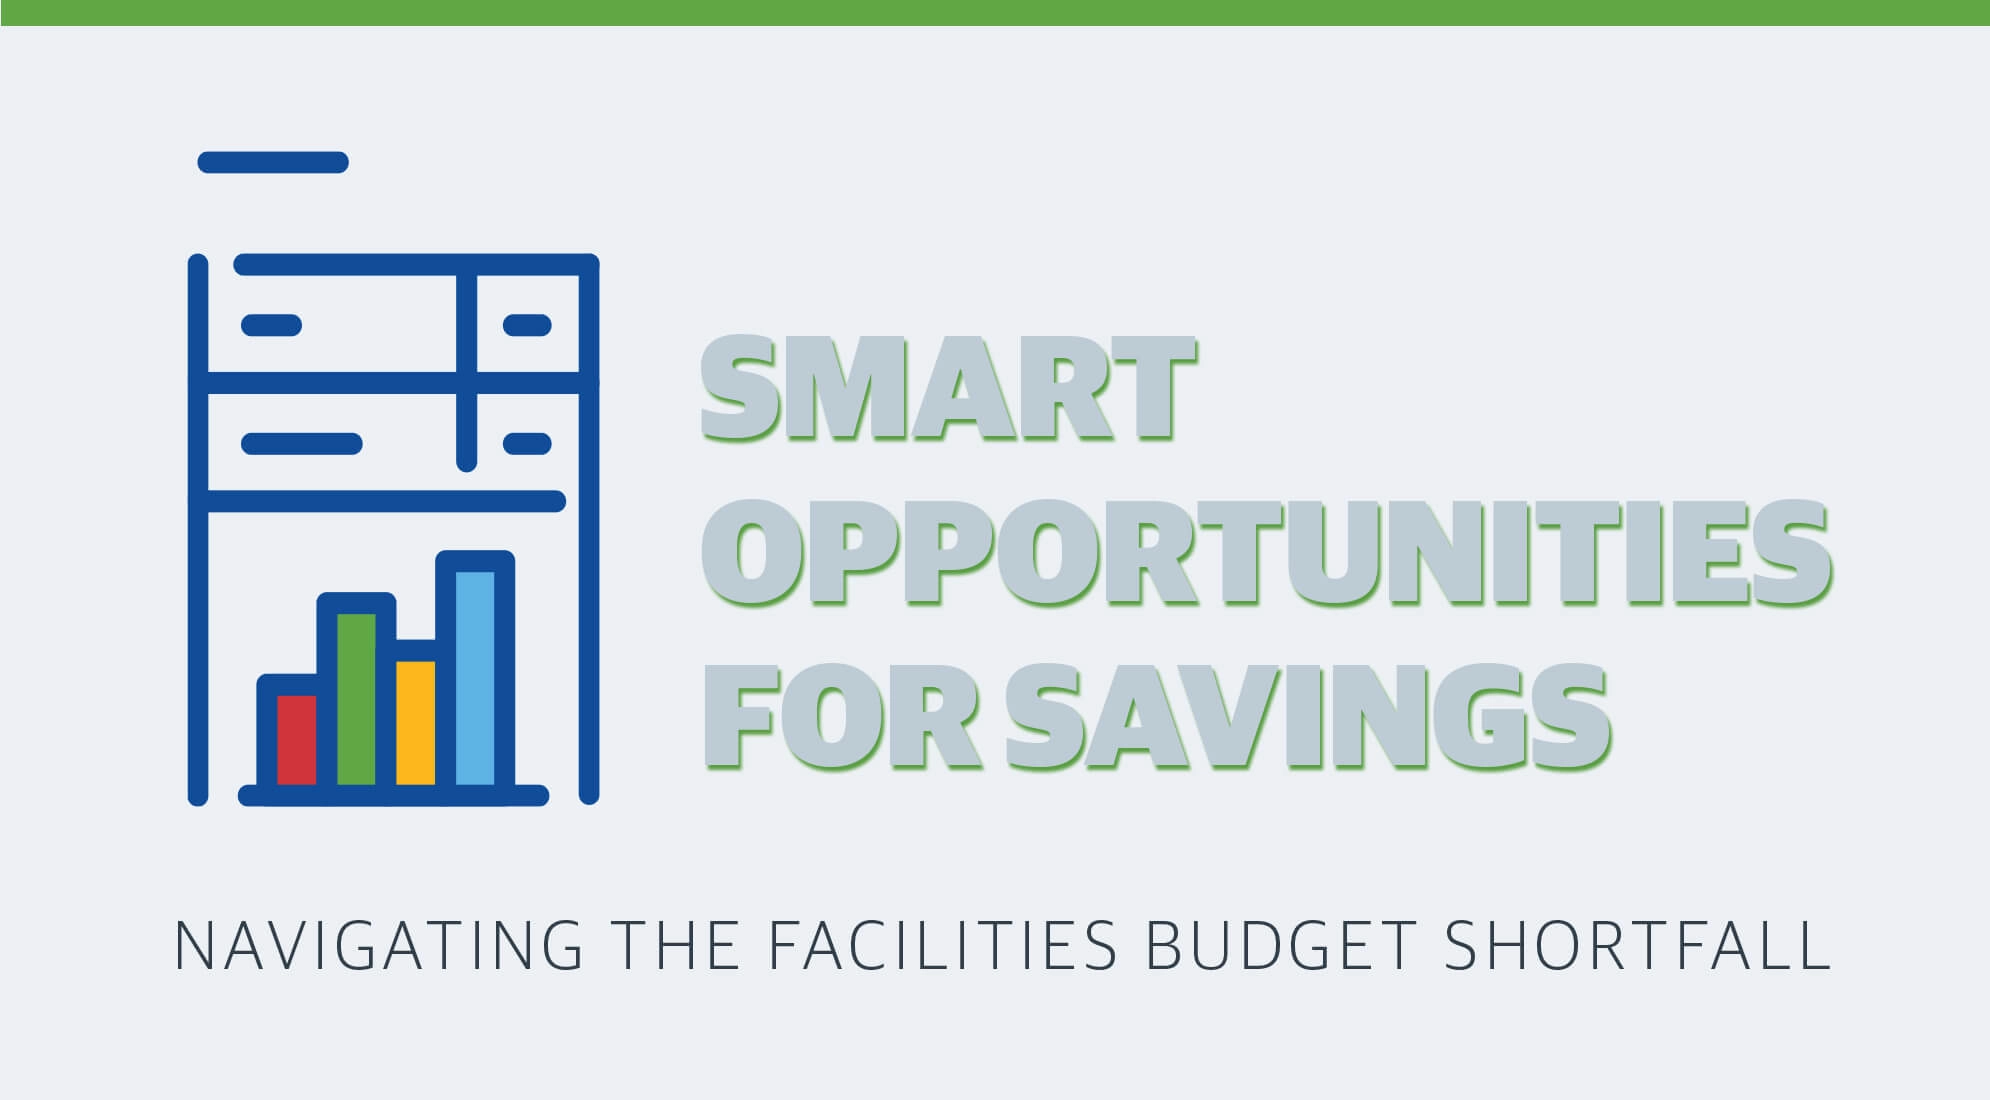 Smart Opportunities for Savings in Facilities Budgets